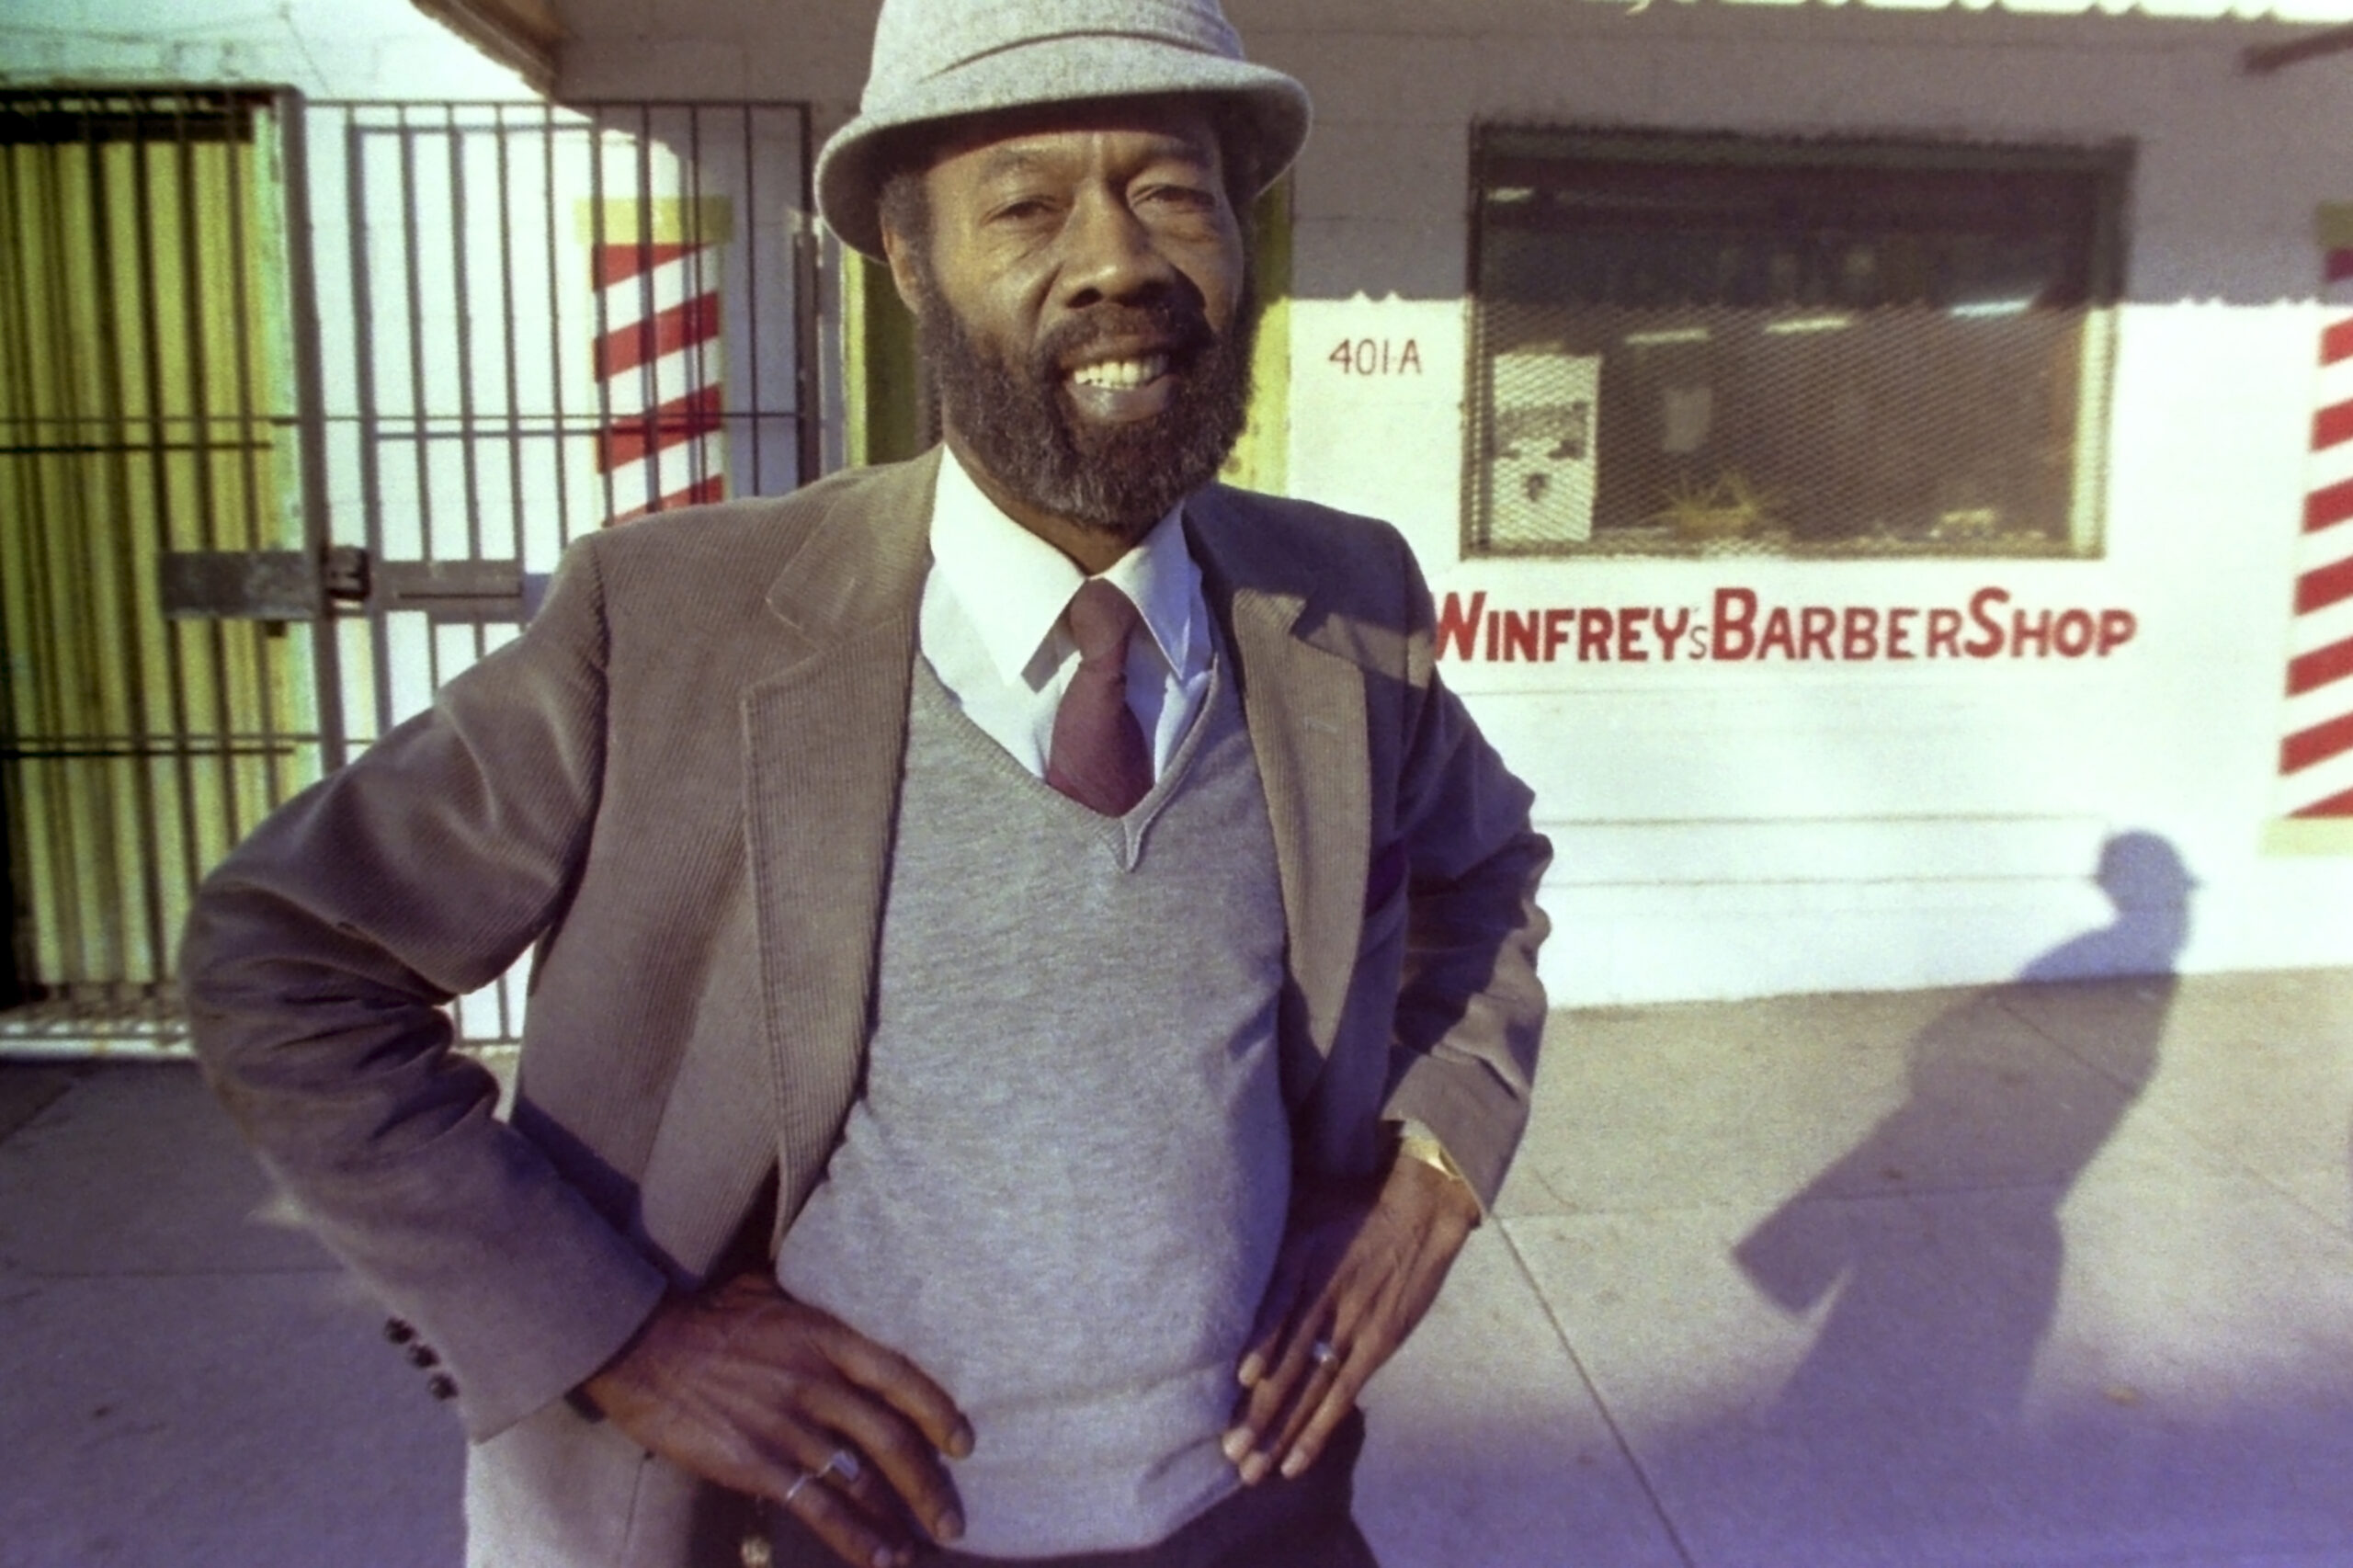 Vernon Winfrey, father of Oprah Winfrey, stands outside his barber shop in Nashville, Tenn., in 1987. Oprah Winfrey confirmed in an Instagram post that her father died Friday, July 8, 2022, at the age of 89. (AP Photo/Mark Humphrey)